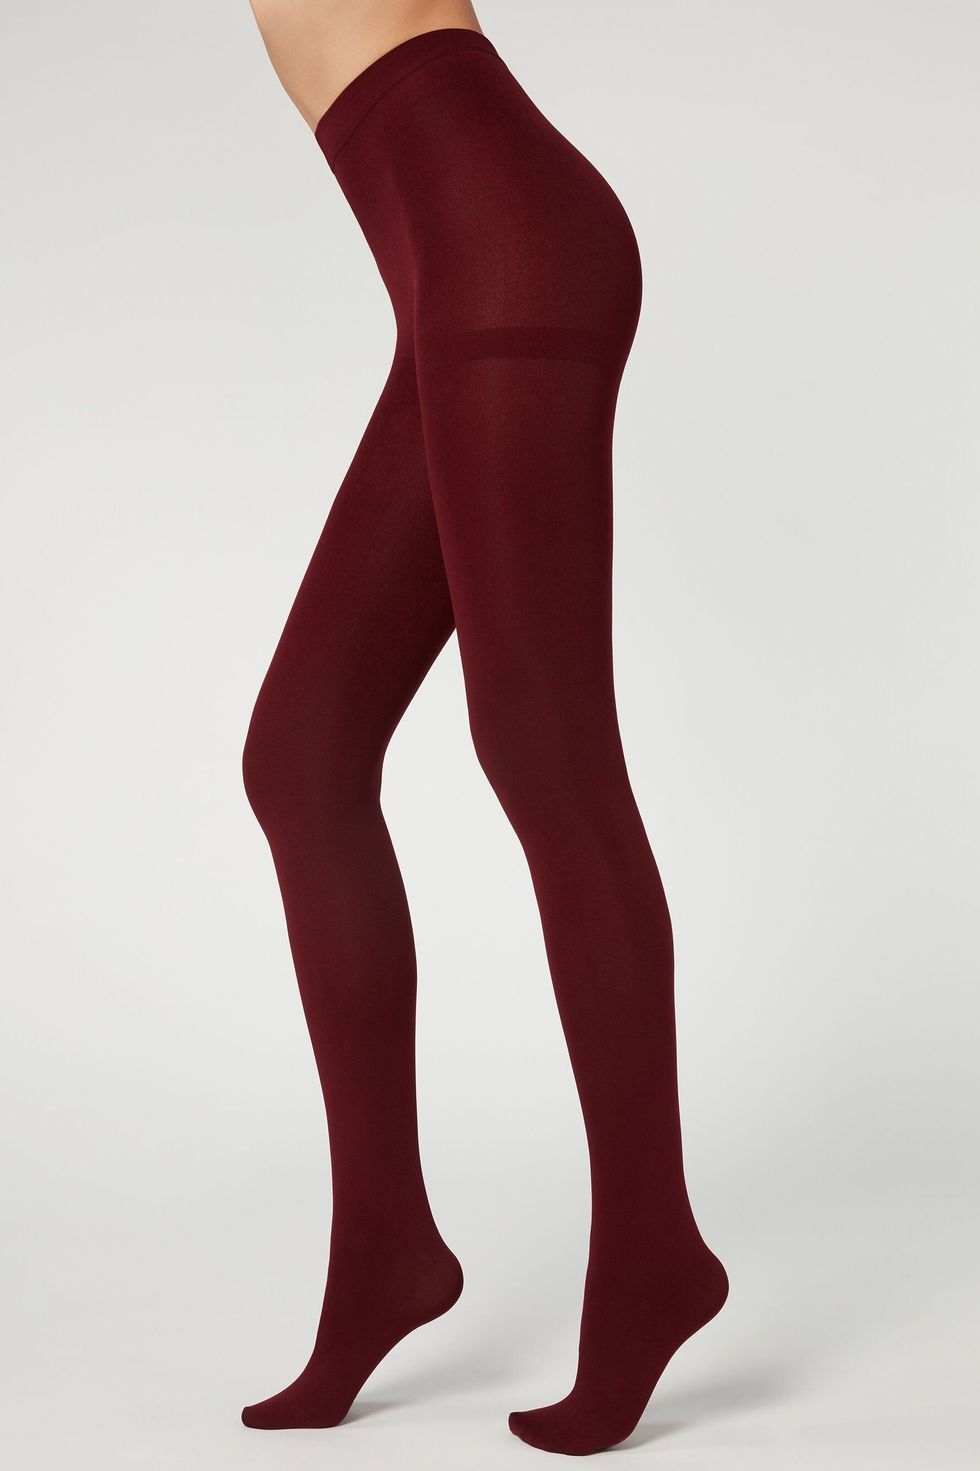 Thermal Tights: Insulating and Trendy, Calzedonia